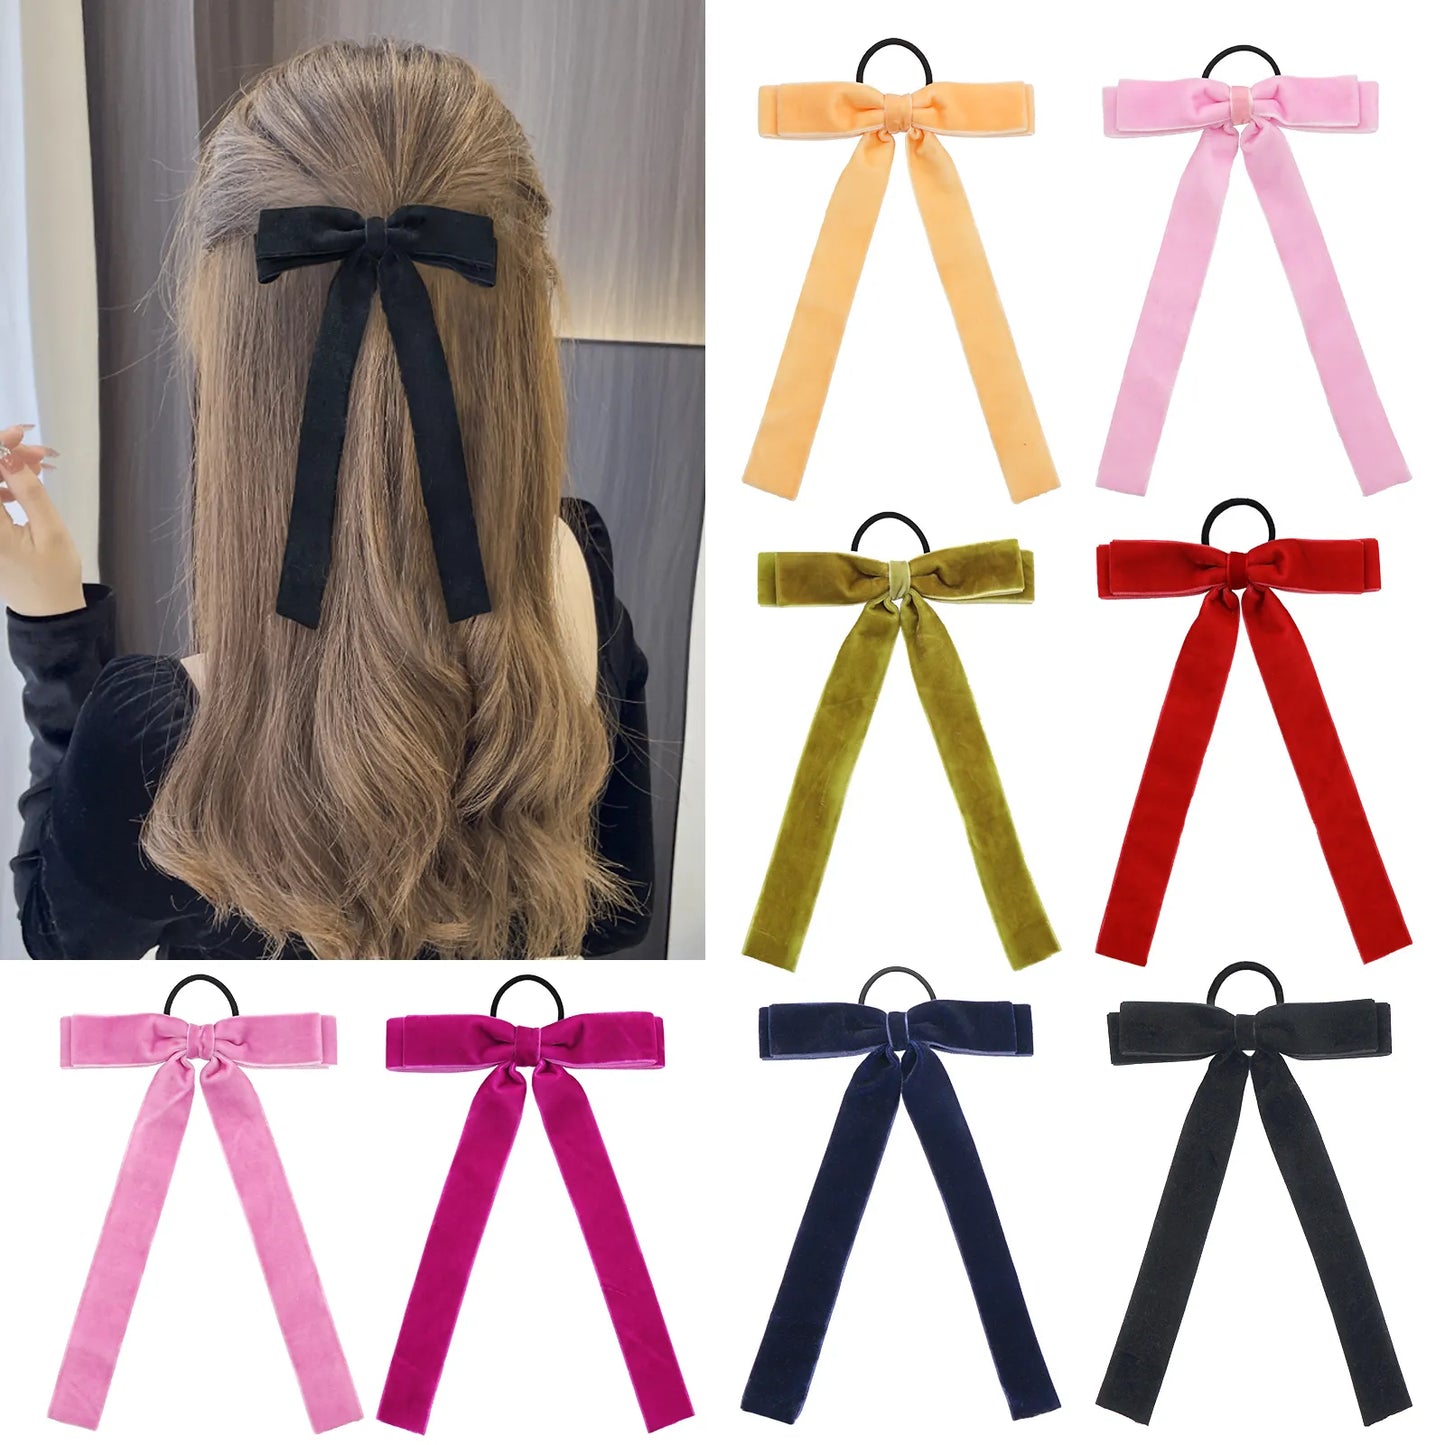 Velvet Cheer bow Large Big Bow Hair Ring Knotted Cheer bow Women Ponytail Hair Ties Solid Color Rubber Band Hair Accessories